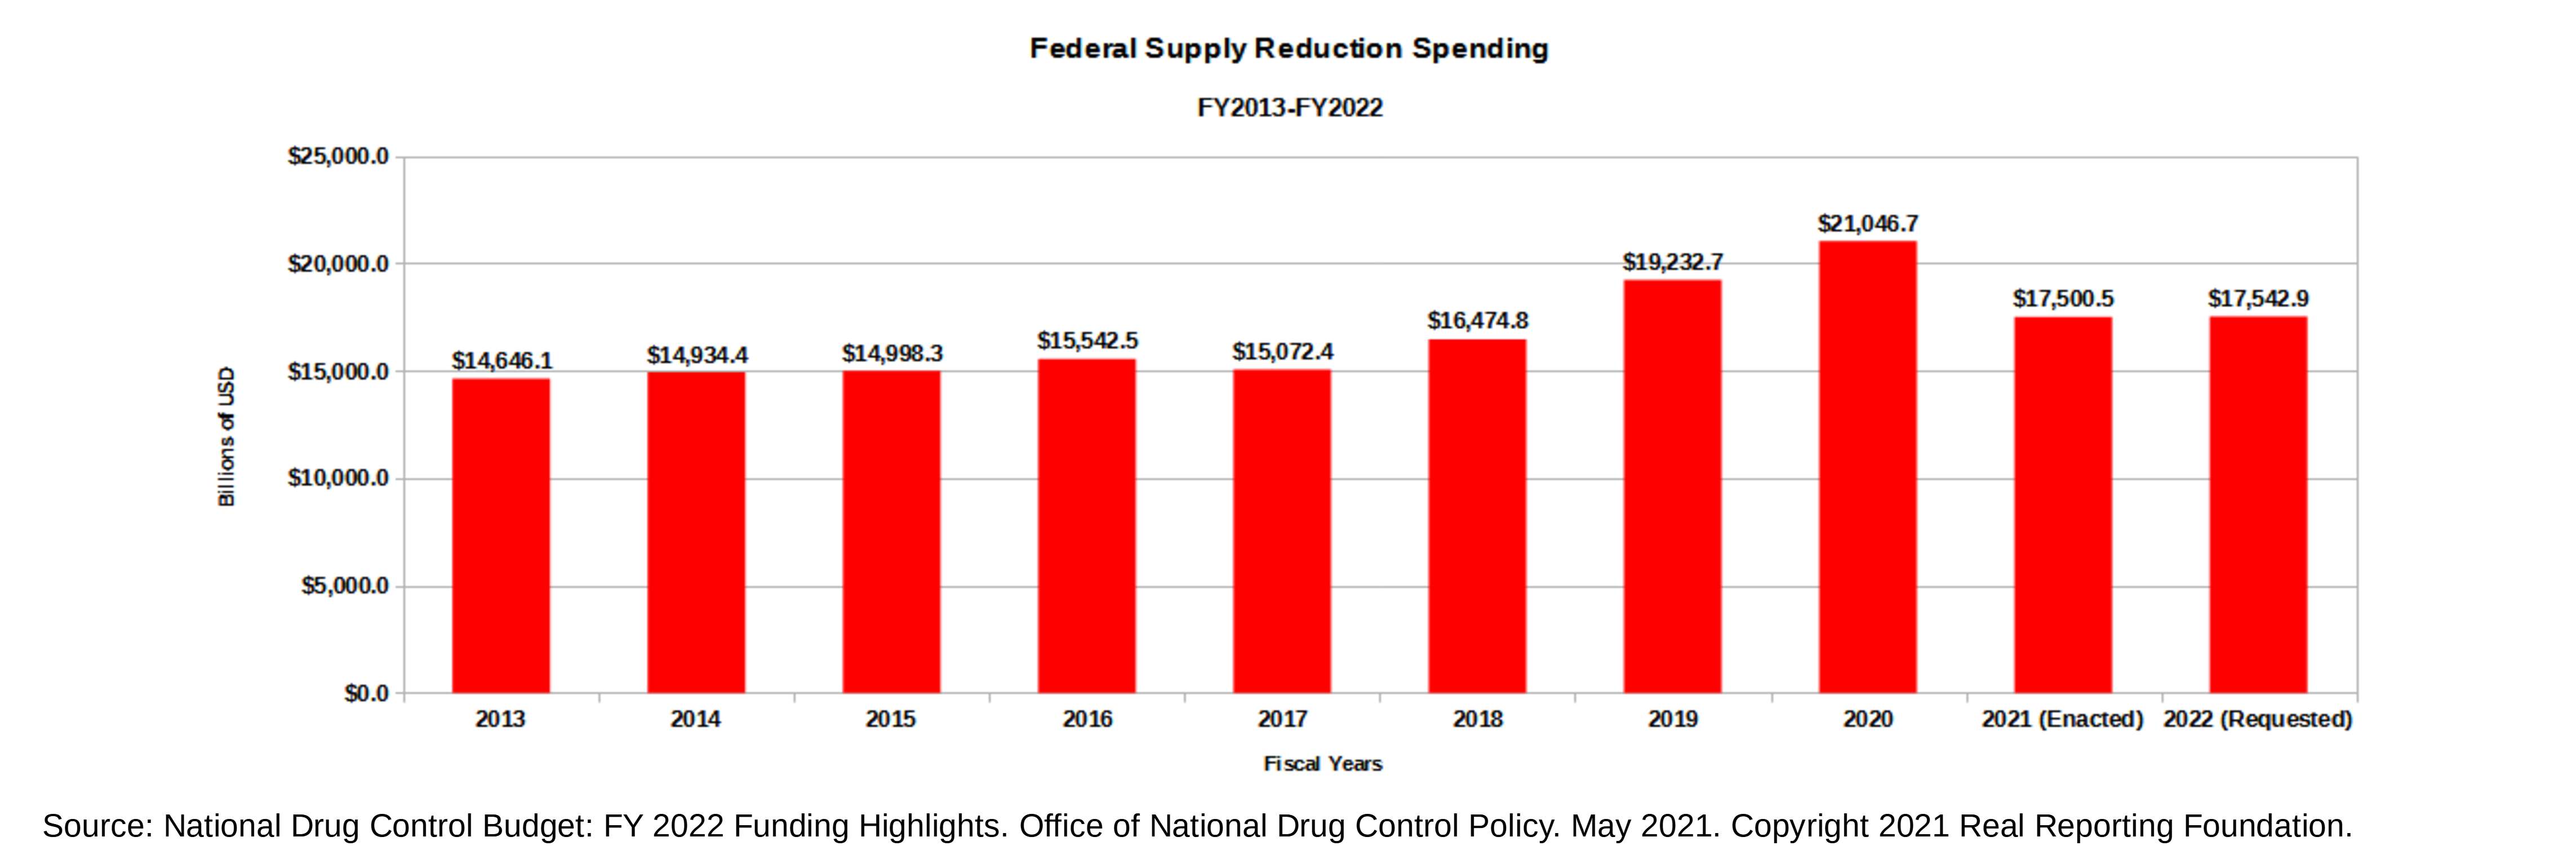 bar graph showing federal drug control spending on the supply side from FY2013 through FY2022